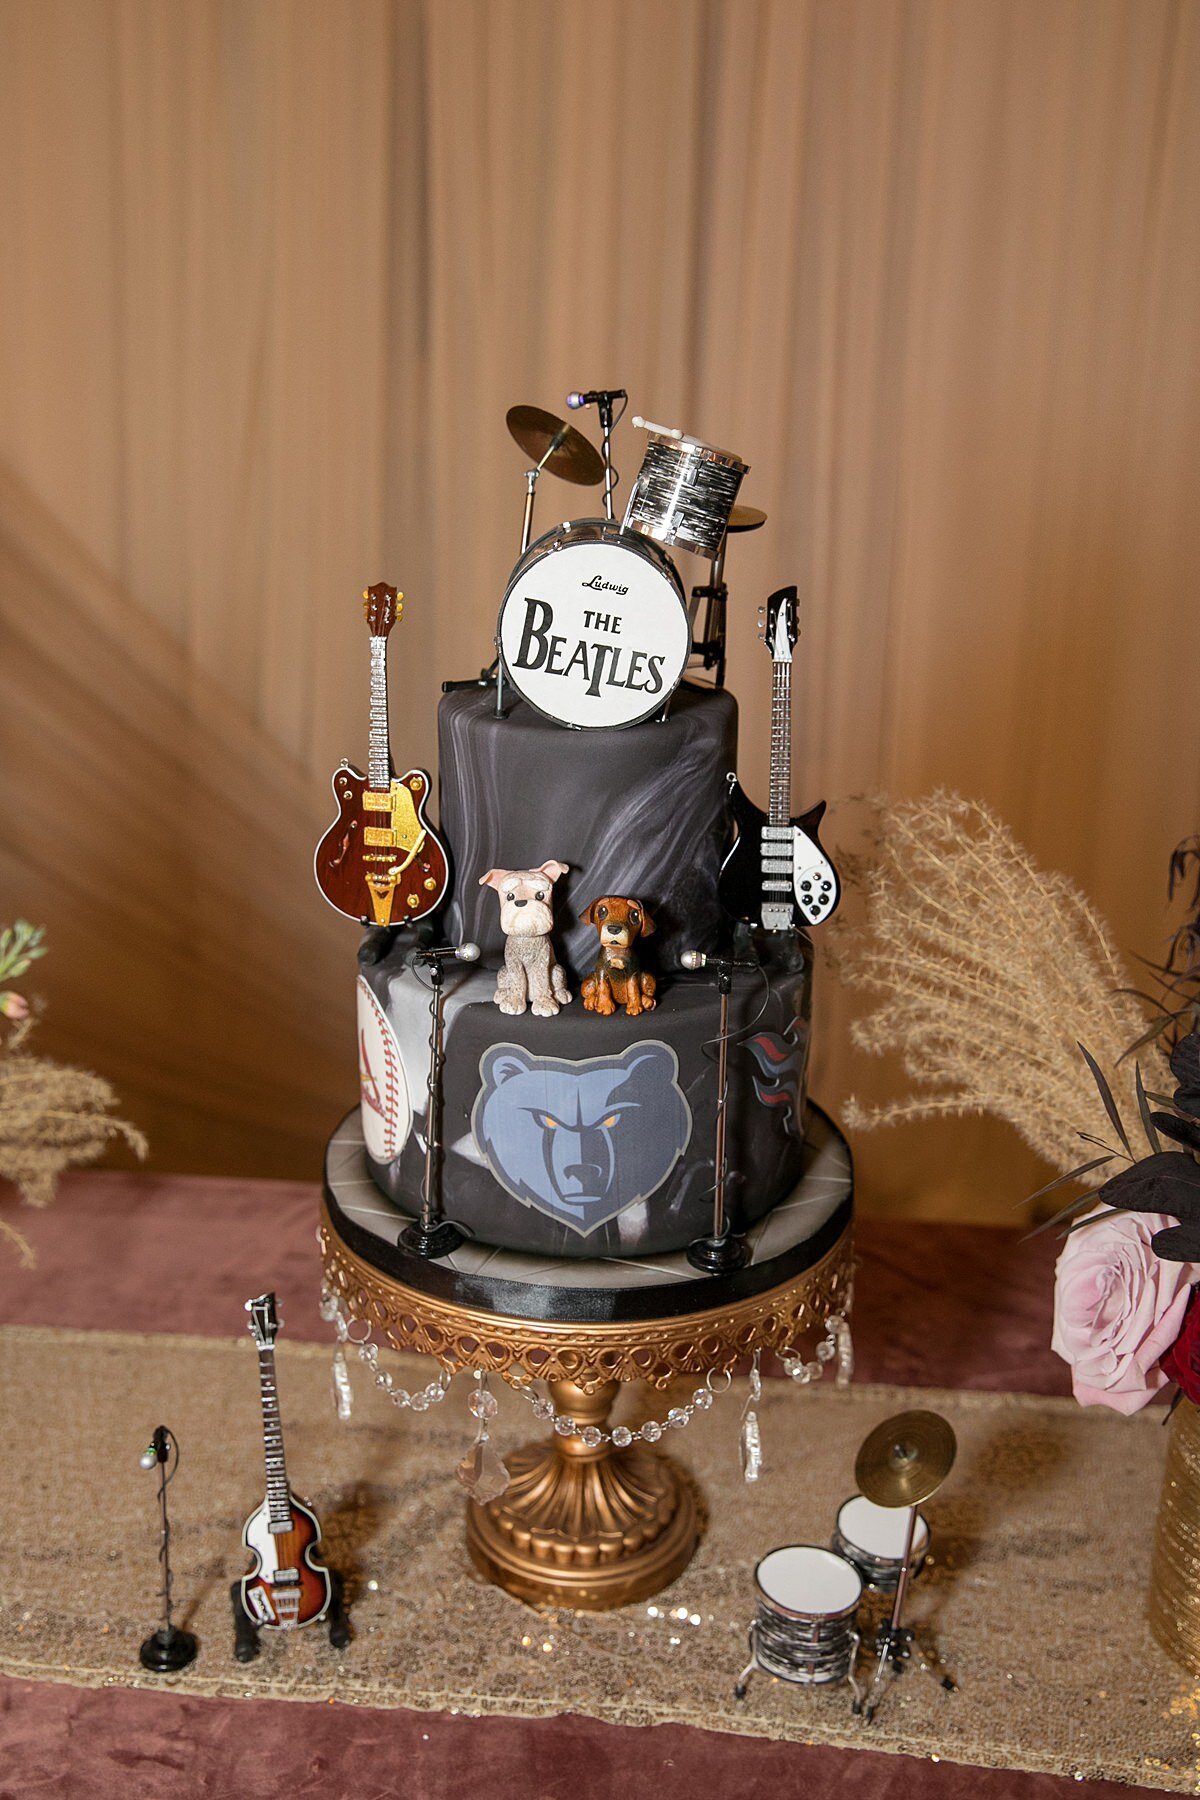 Two tier grooms cake with the Memphis grizzlies logo and a black and gray marbled fondant decorated with two small dogs and the Beatles drum kit cake topper, electric guitars and microphones.